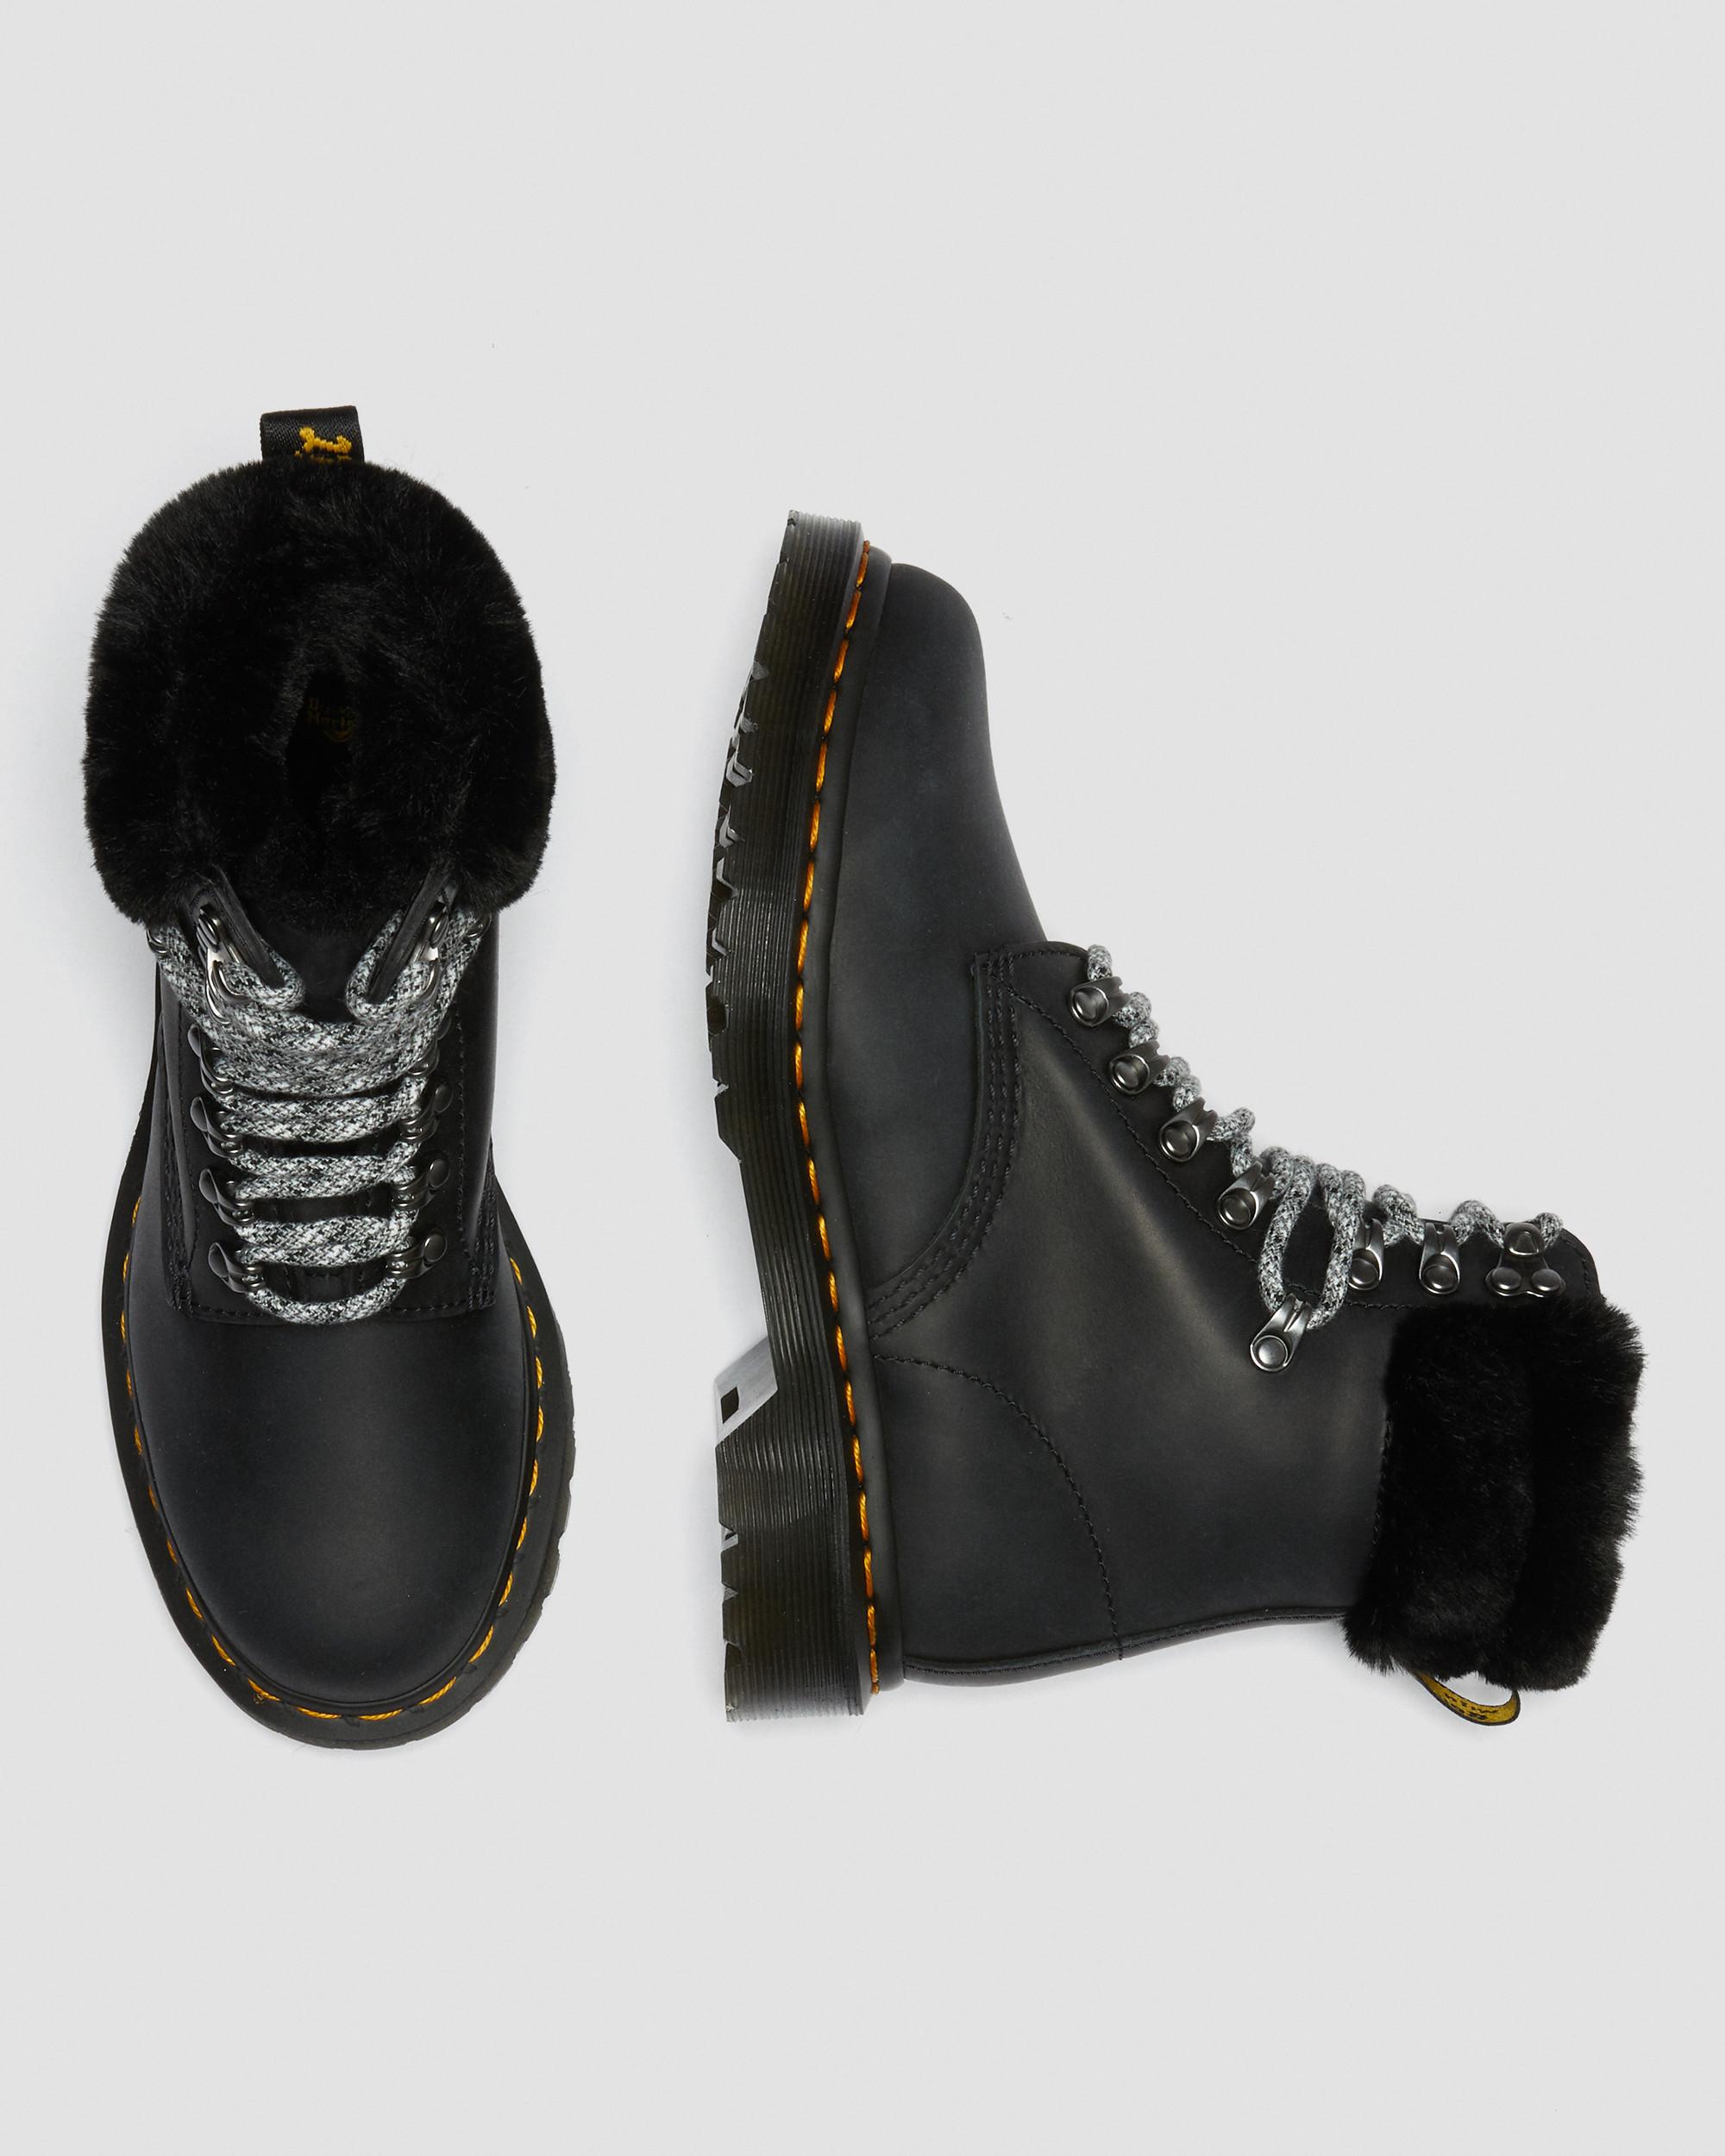 1460 Serena Collar Faux Fur Lined Lace Up Boots1460 Serena Collar Faux Fur Lined Lace Up Boots Dr. Martens